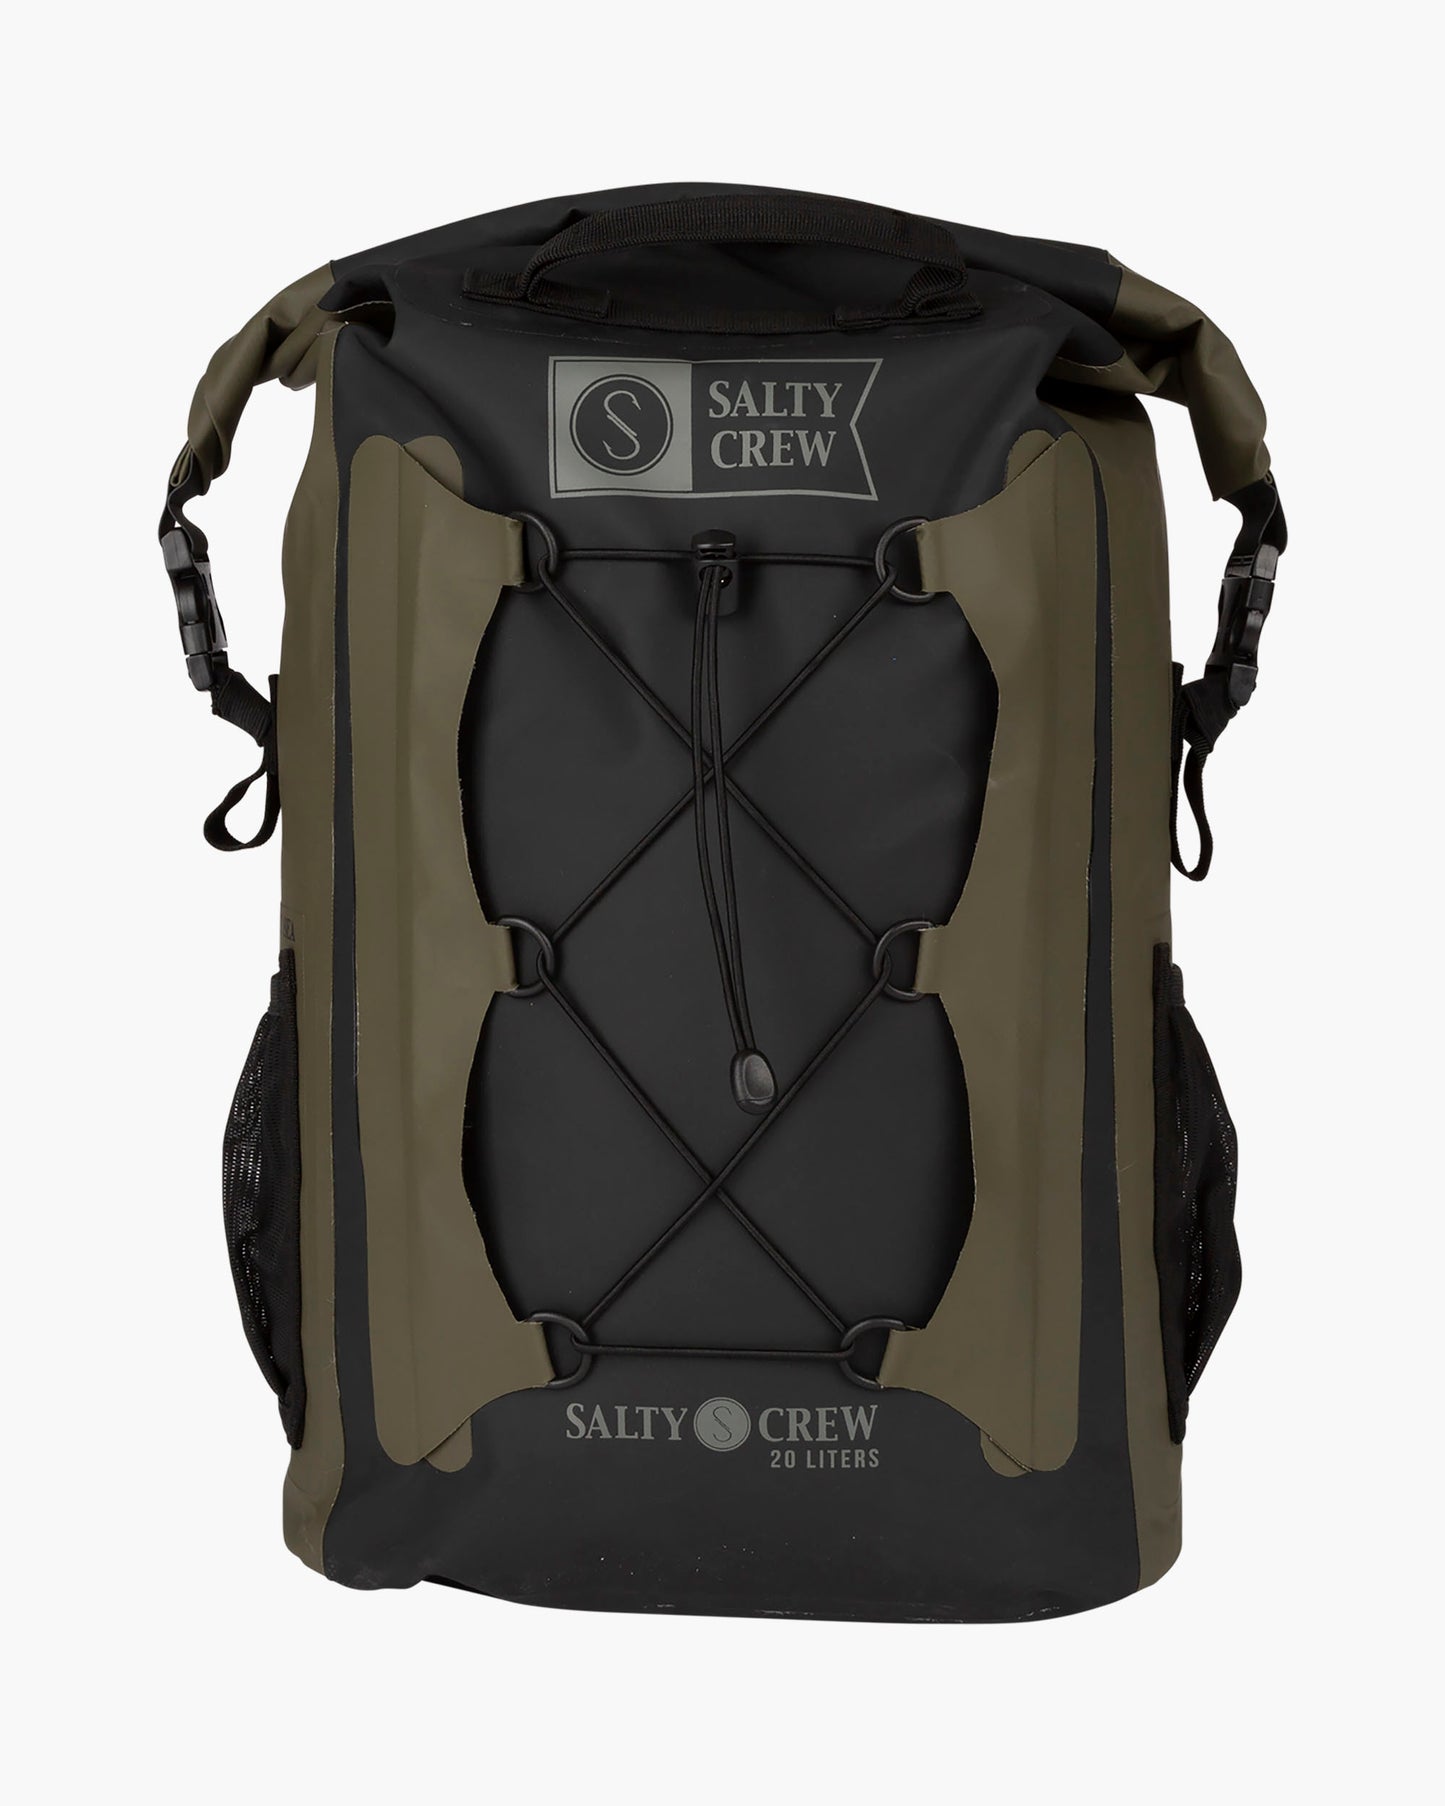 VOYAGER ROLL TOP BACKPACK - Black/Military